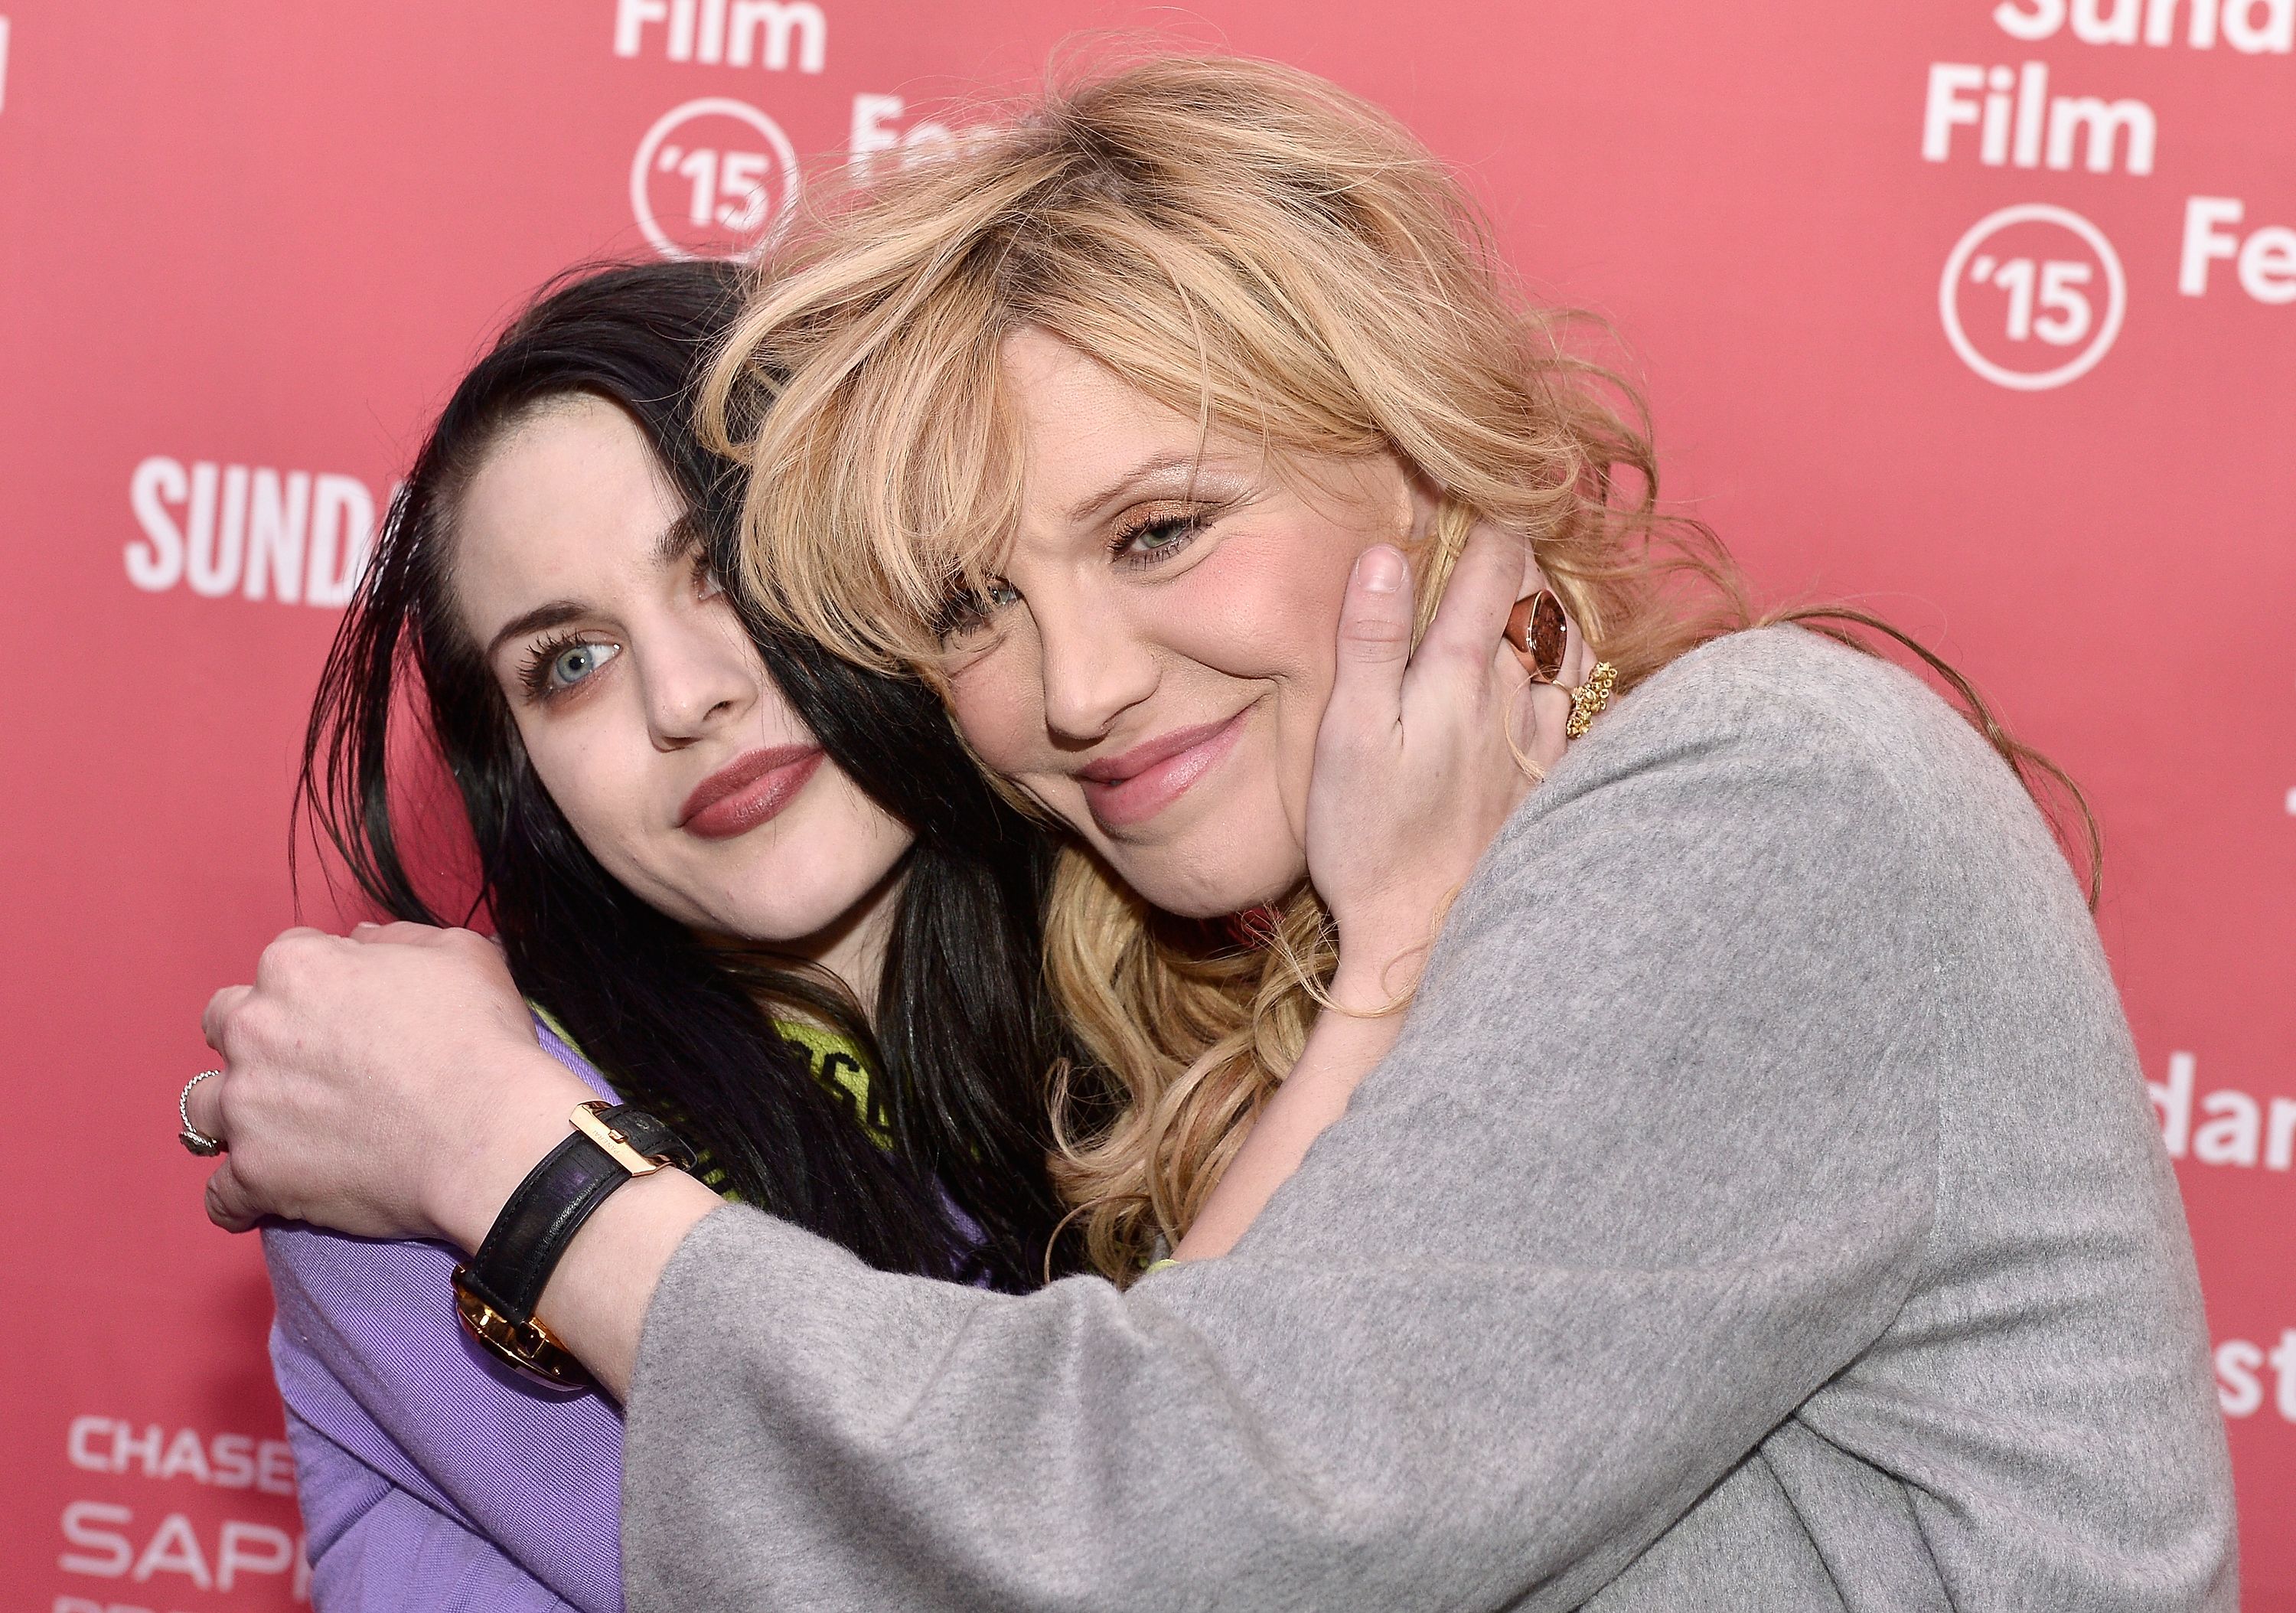 Frances Bean Cobain and Courtney Love at the "Kurt Cobain: Montage Of Heck" premiere at the 2015 Sundance Film Festival | Source: Getty Images